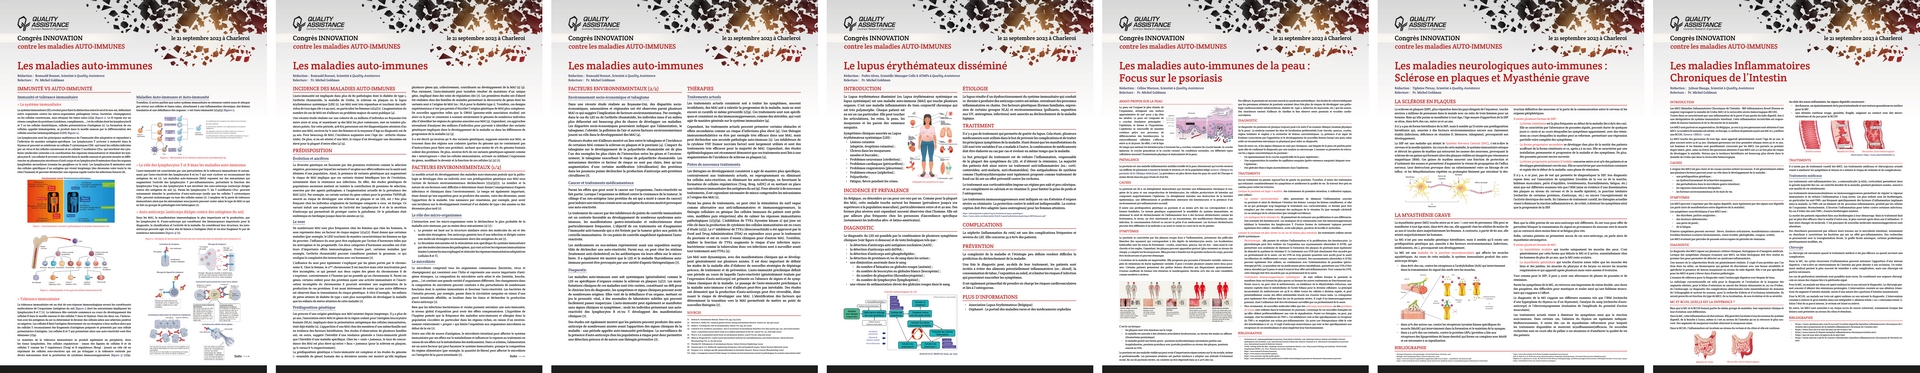 Posters Maladies auto-immunes Quality Assistance